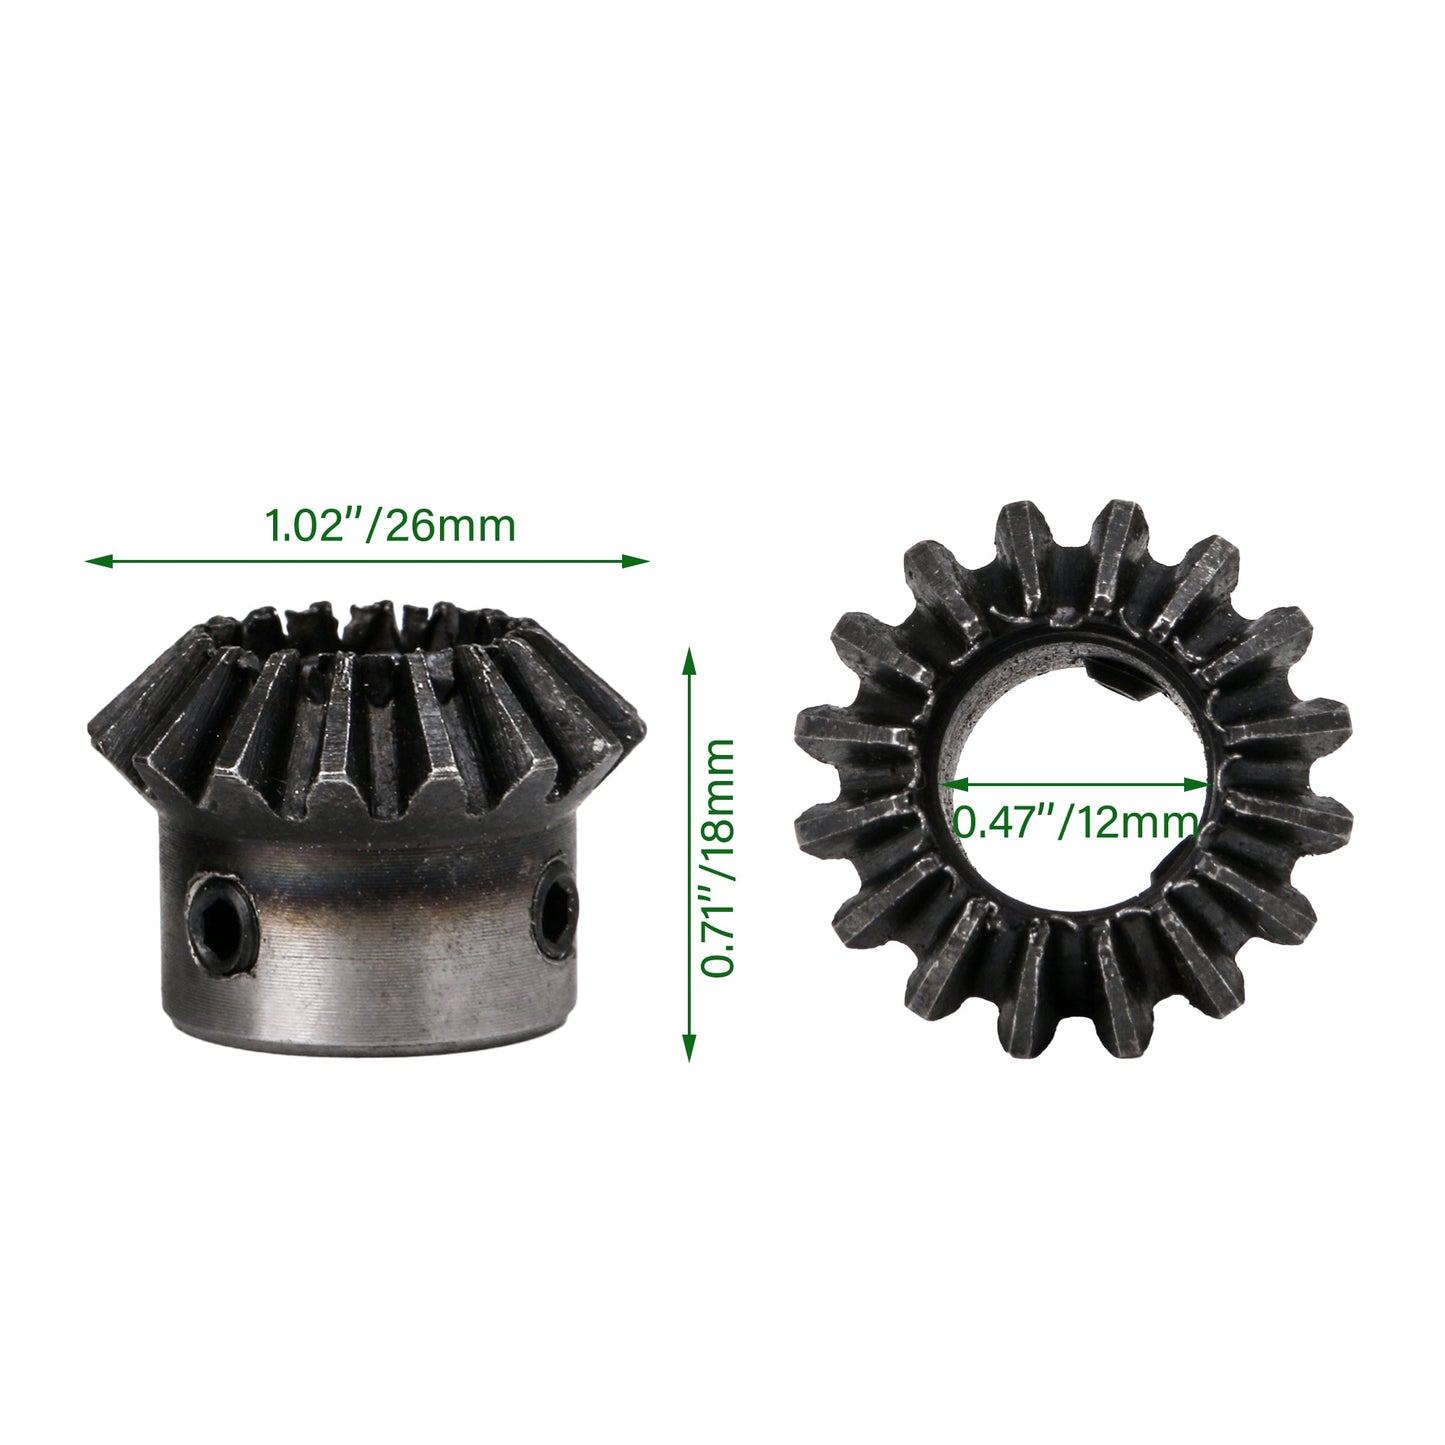 BQLZR Tapered Bevel Gear Wheel 1.5 Modulus 16T 0.47inch for DIY Motor Driving Pack of 8